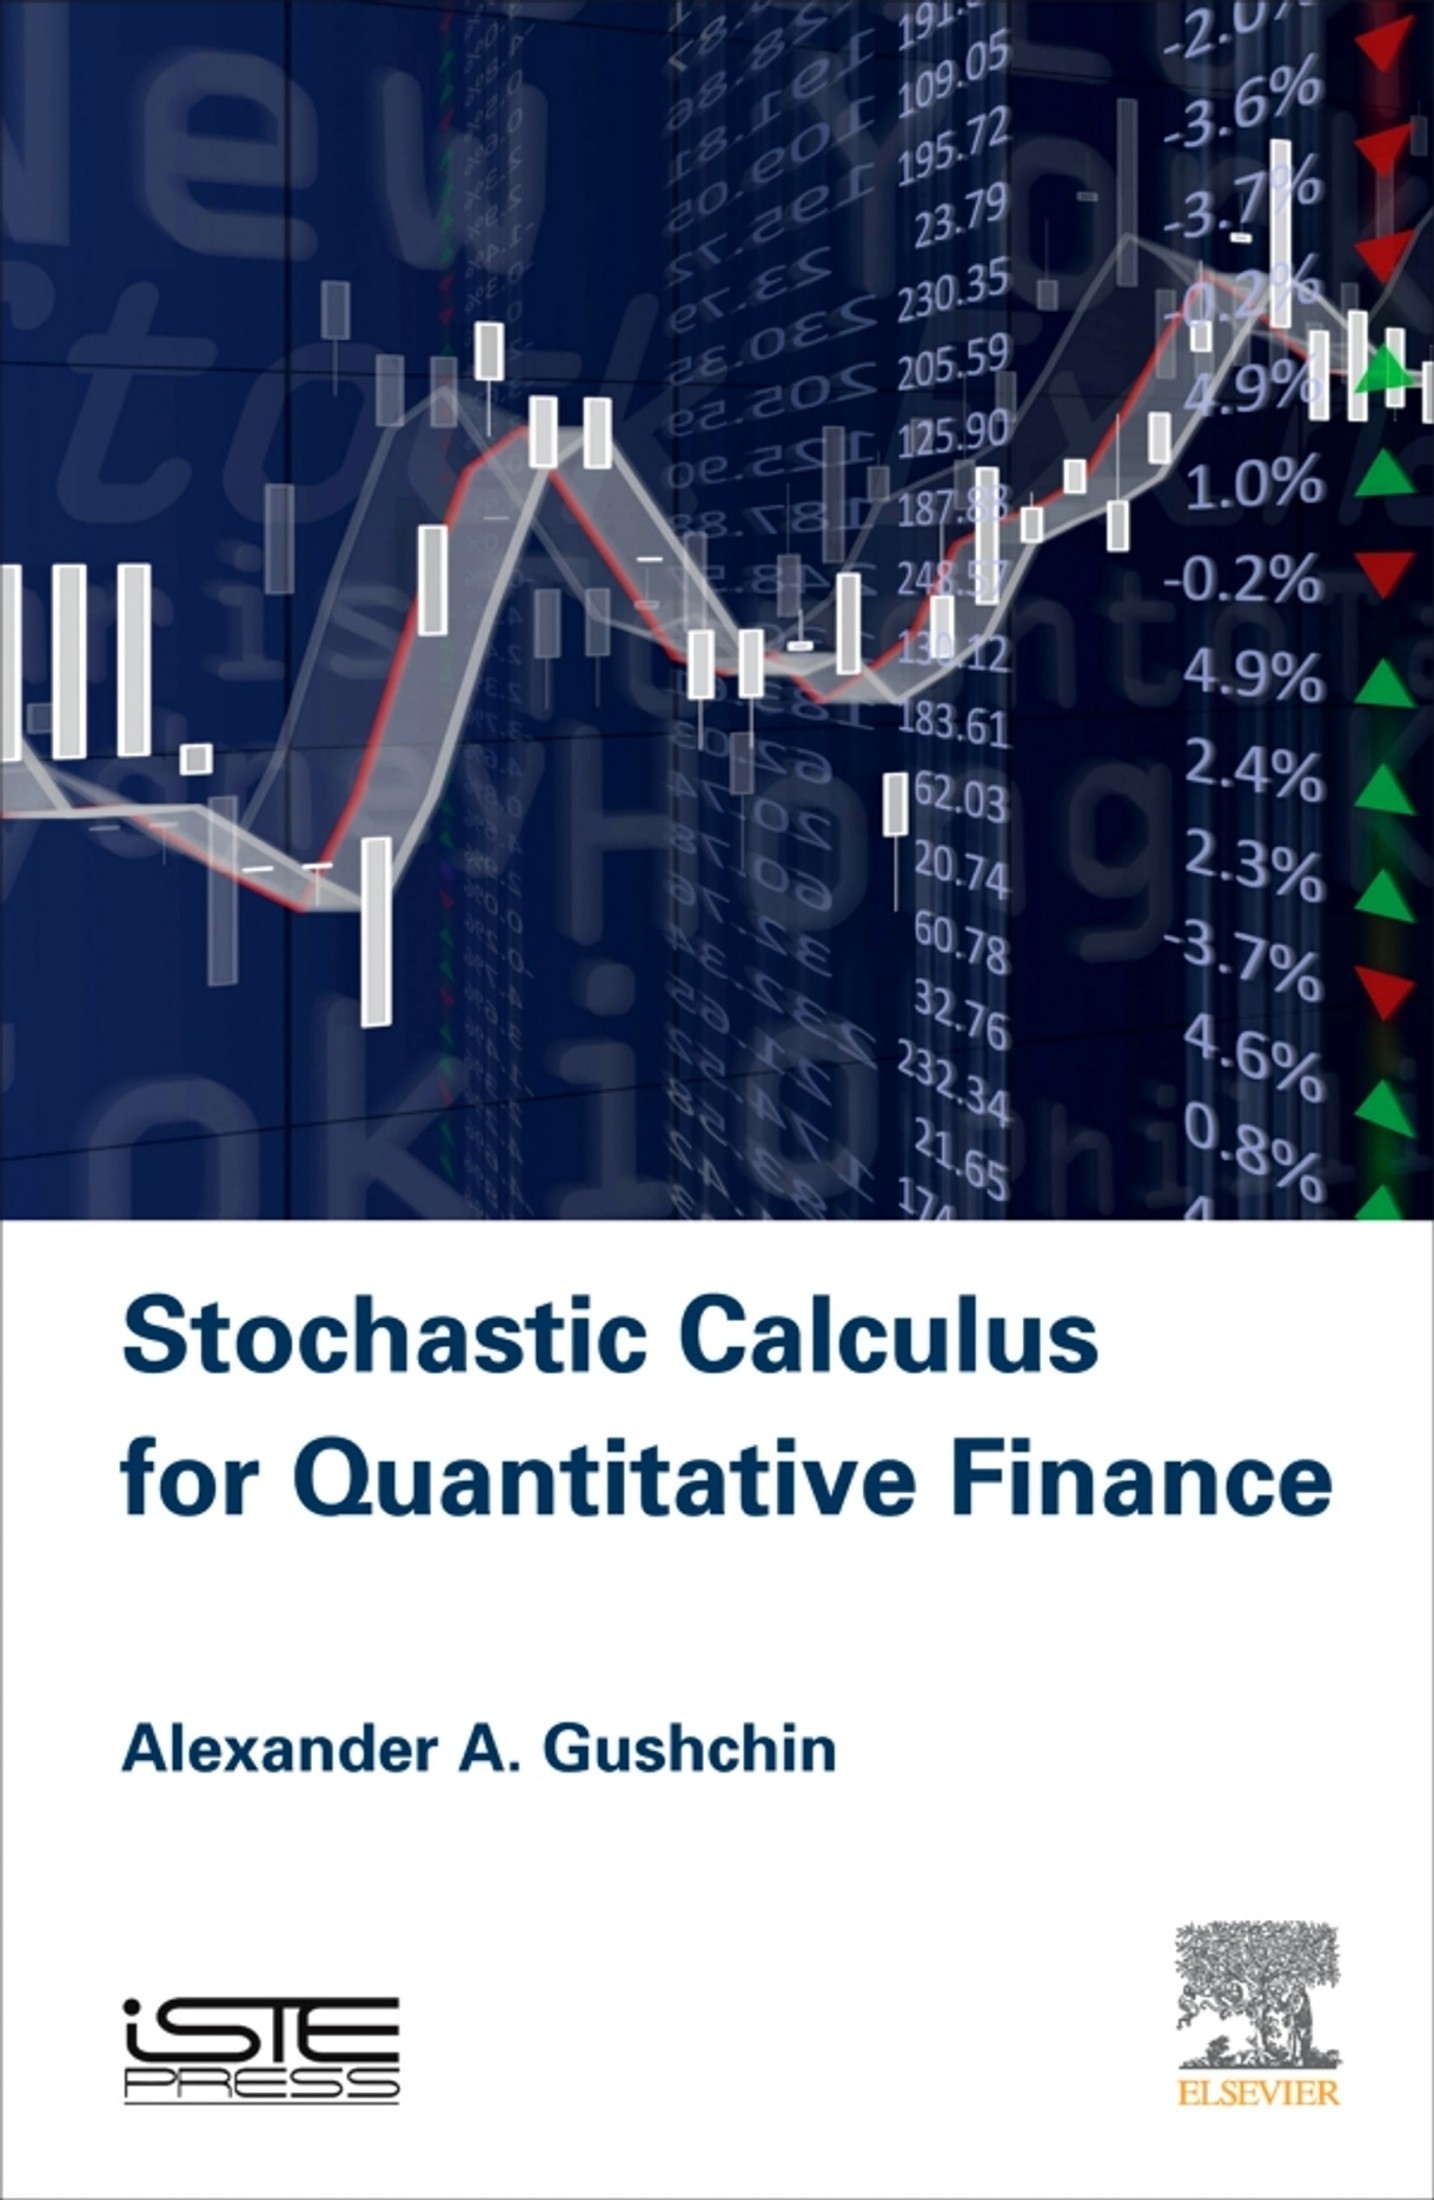 Mathematical Basis for Finance: Stochastic Calculus for Finance